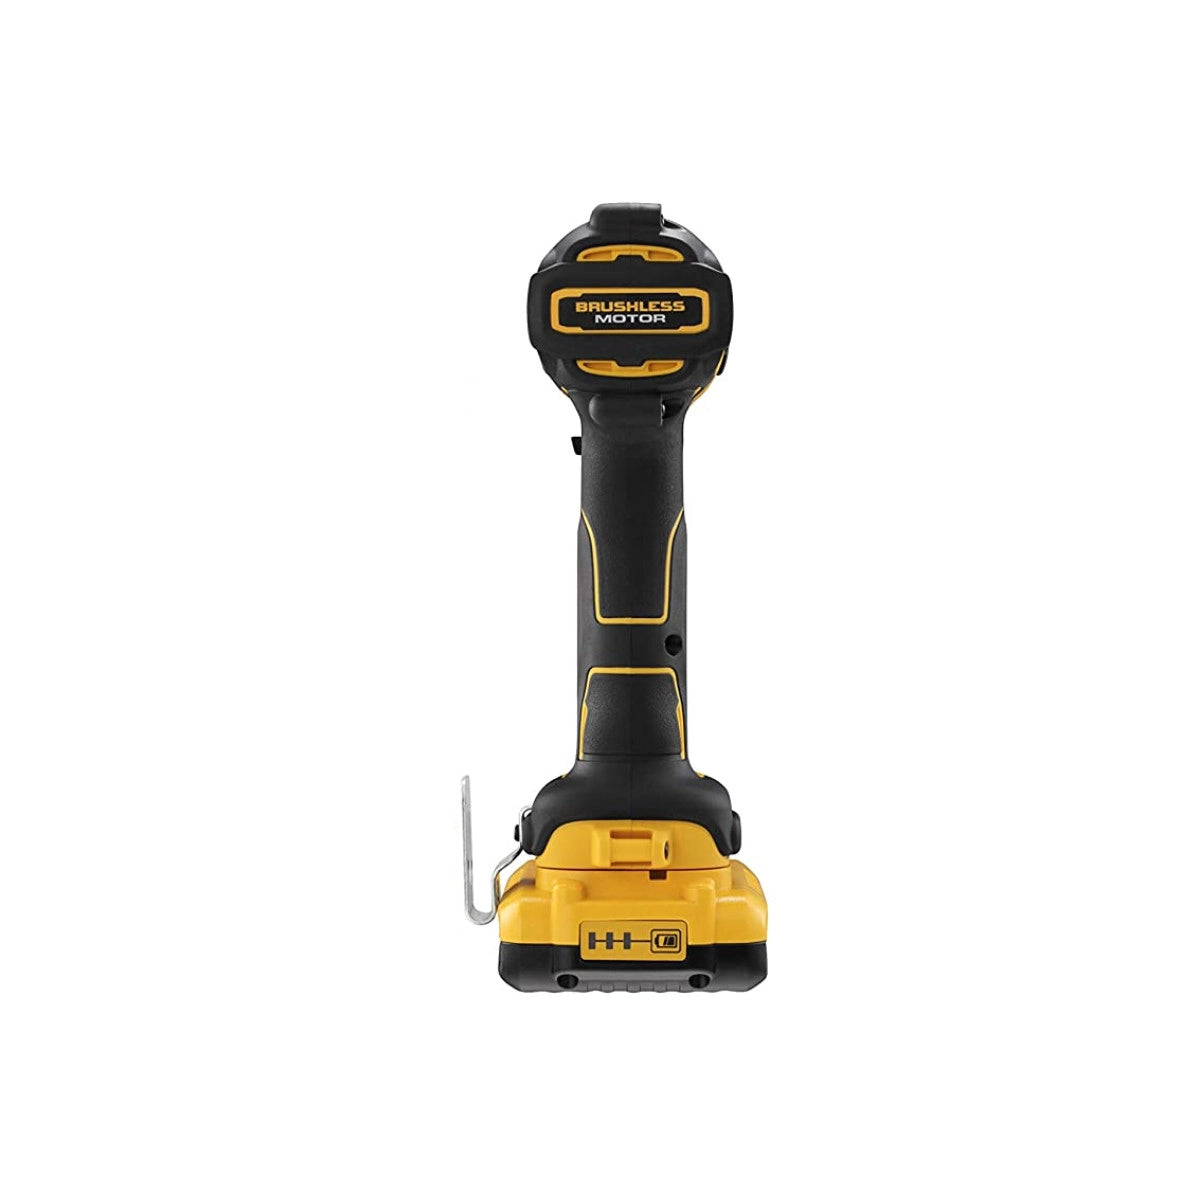 Dewalt 18V Brushless Impact Drill and Brushless Impact Driver Combo Power Tool Services